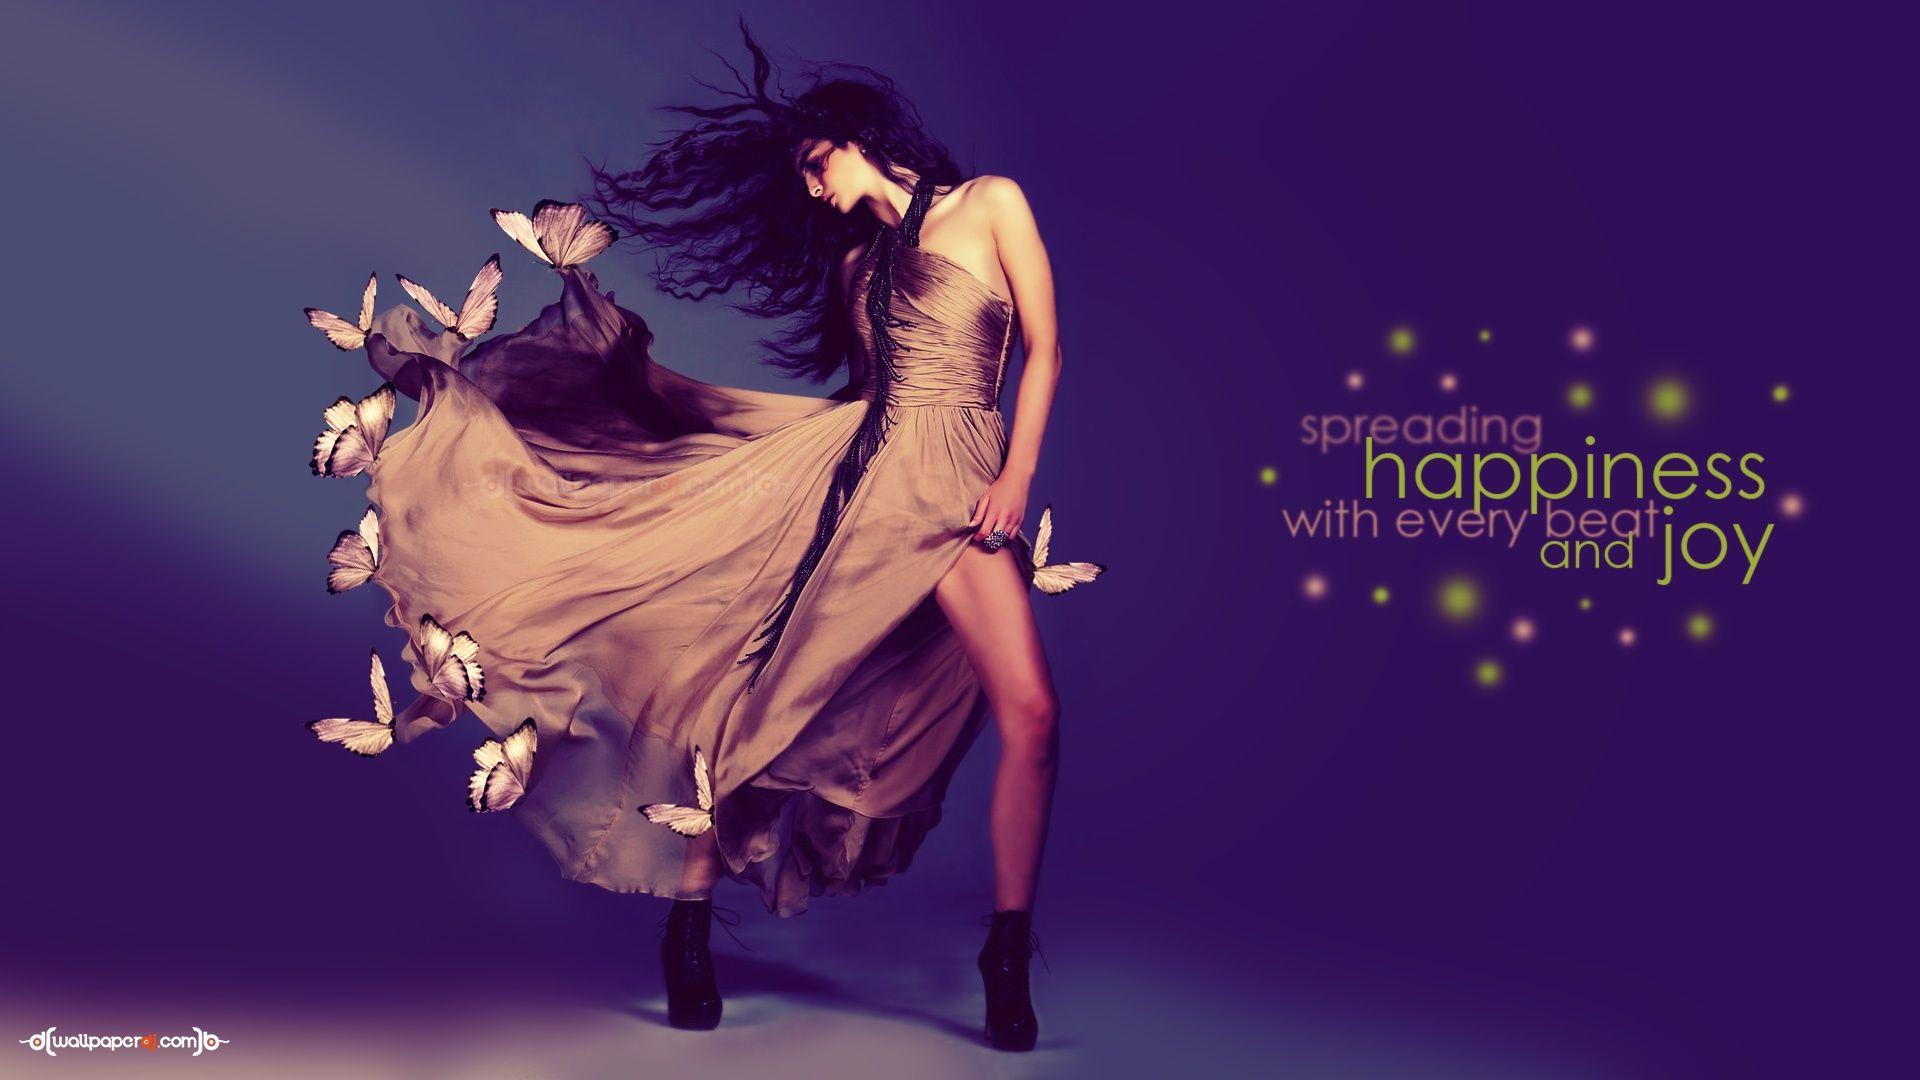 Spreading Happiness wallpaper, music and dance wallpaper